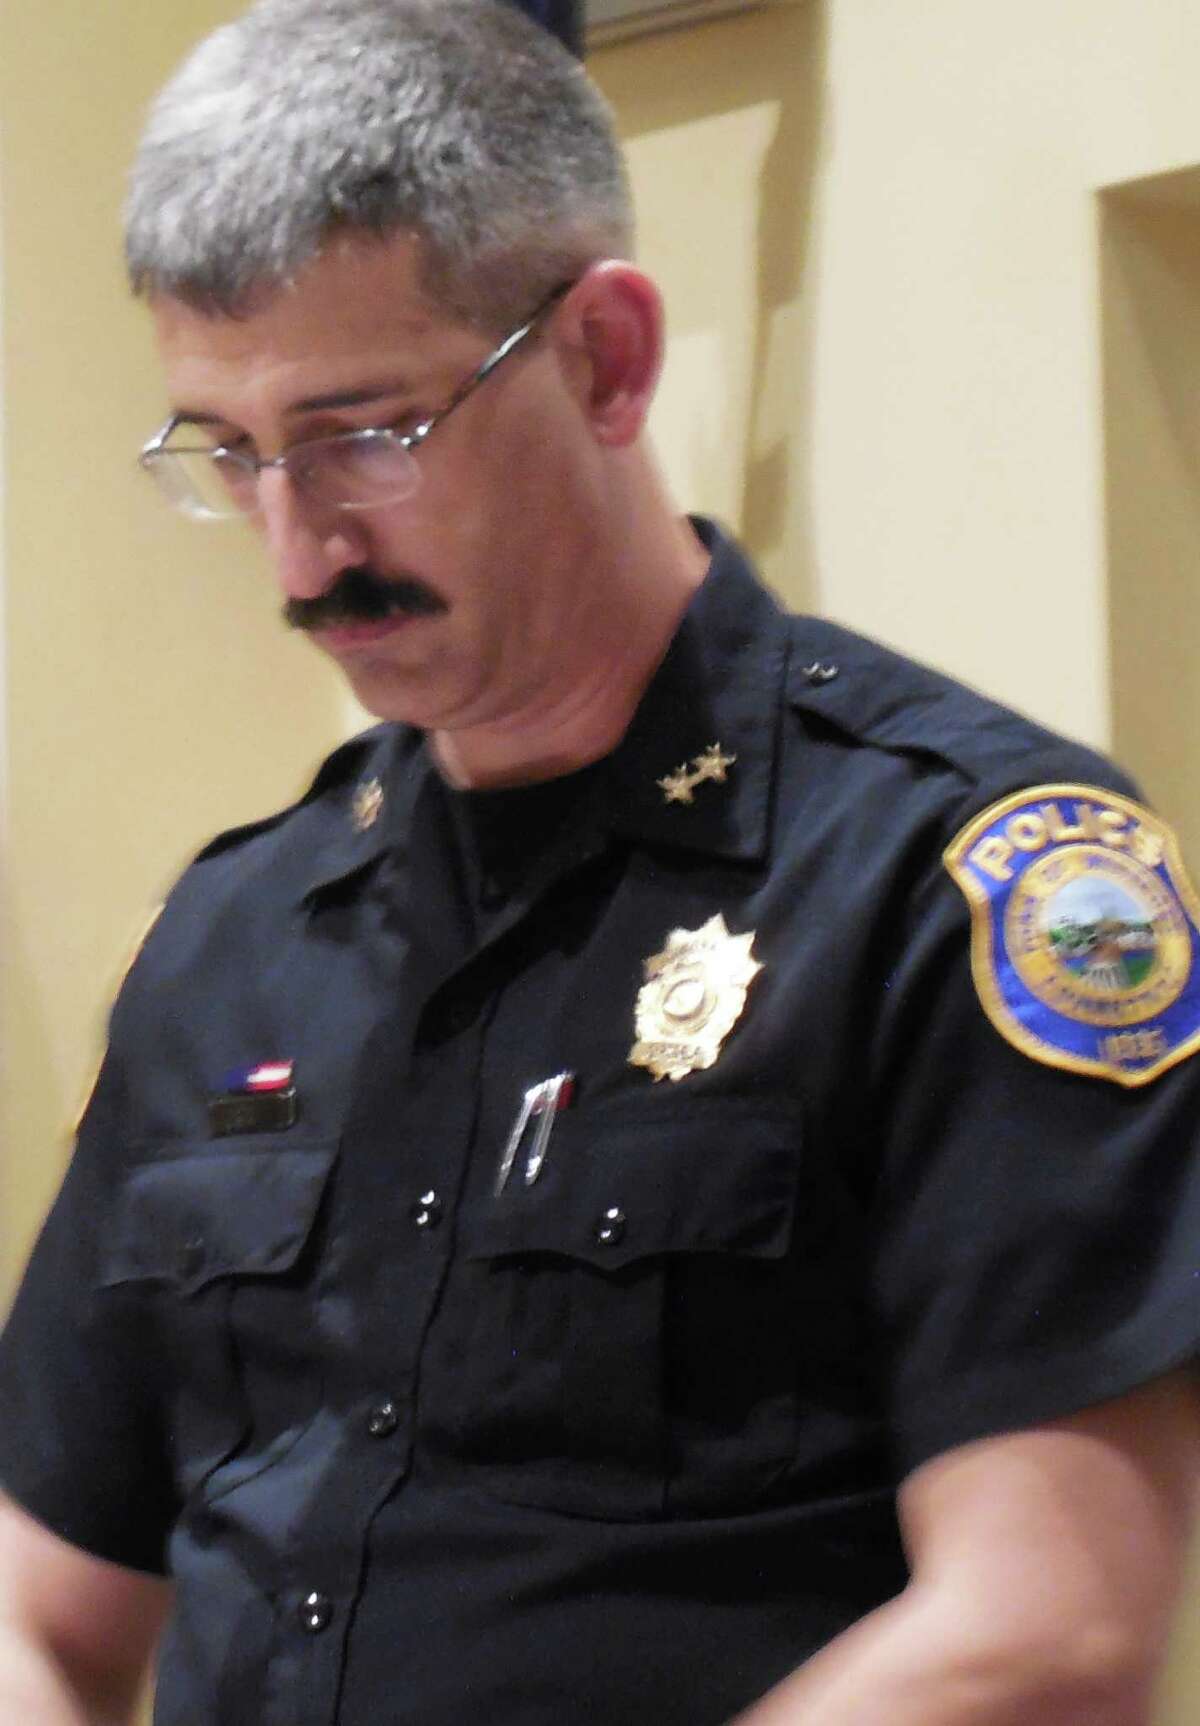 Police Chief Dale Call reads his request for $20,000 funding to purchase up to 15 body-worn video cameras for police officers during Wednesday's Board of Finance meeting.